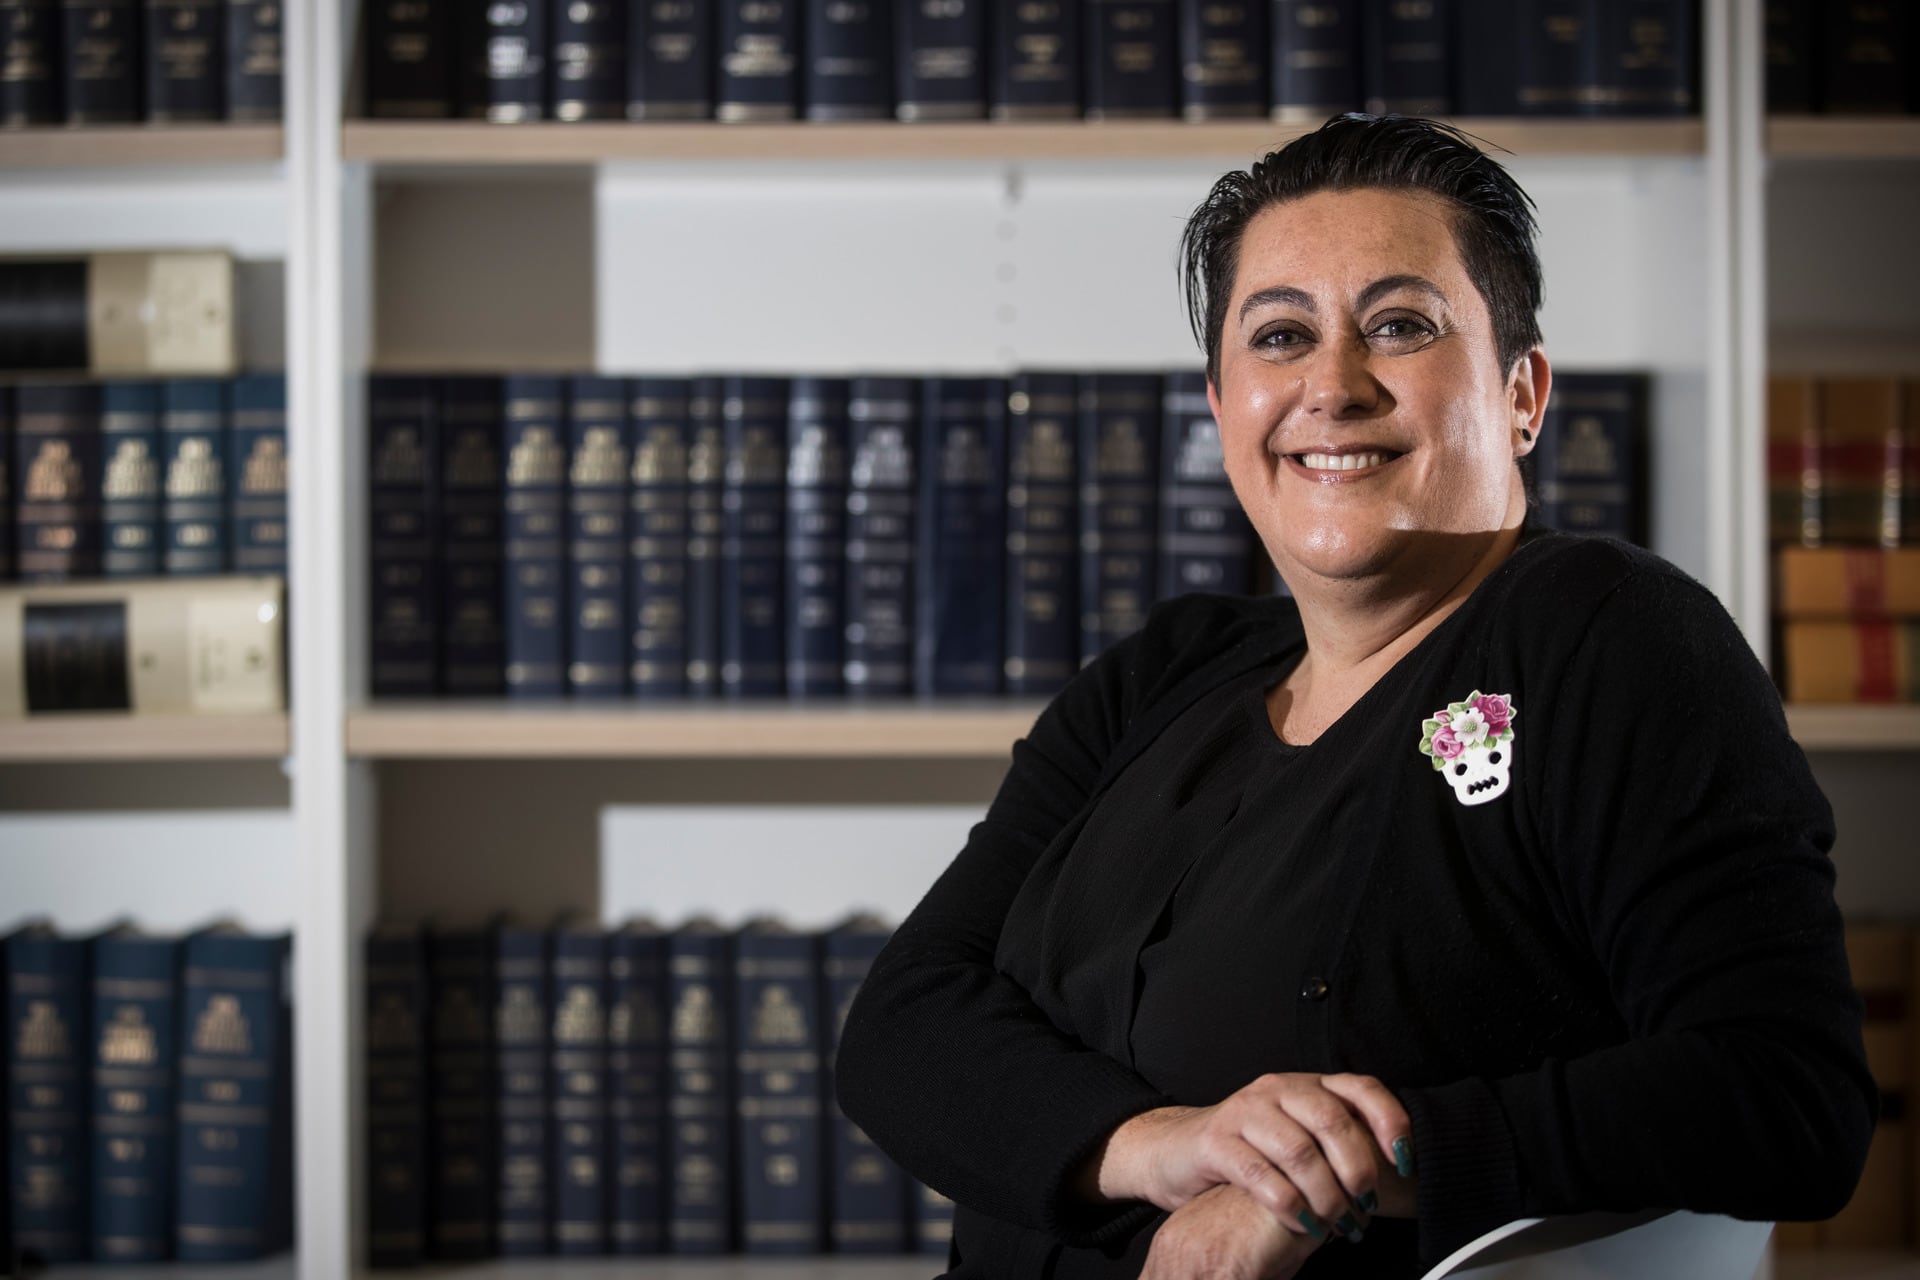 Associate Professor Khylee Quince is the Dean of the School of Law at AUT.